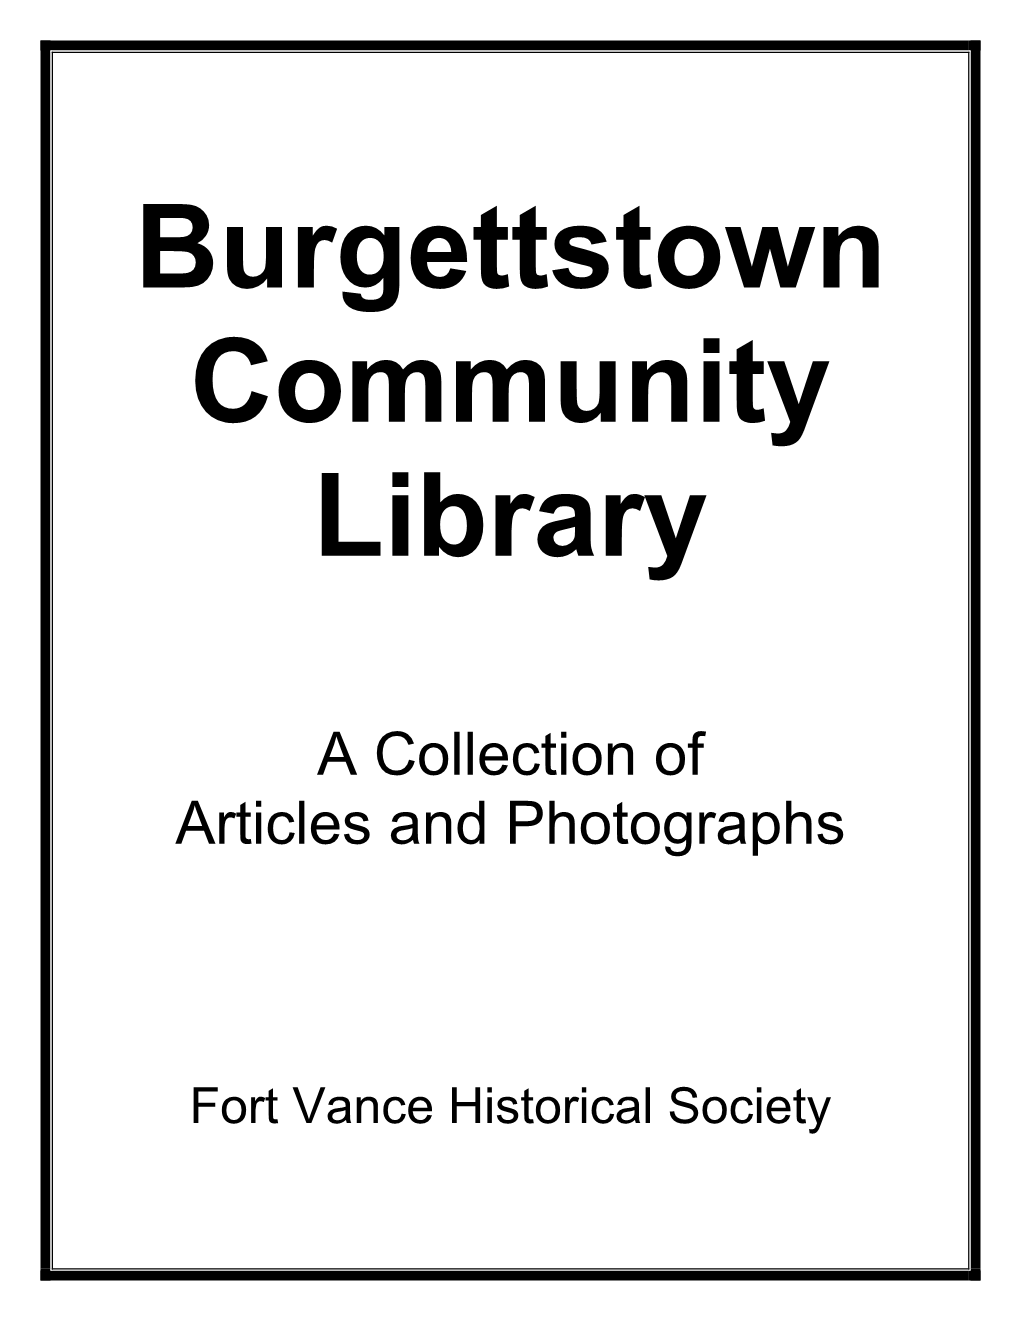 A Collection of Articles and Photographs Chronicling the Burgettstown Community Library